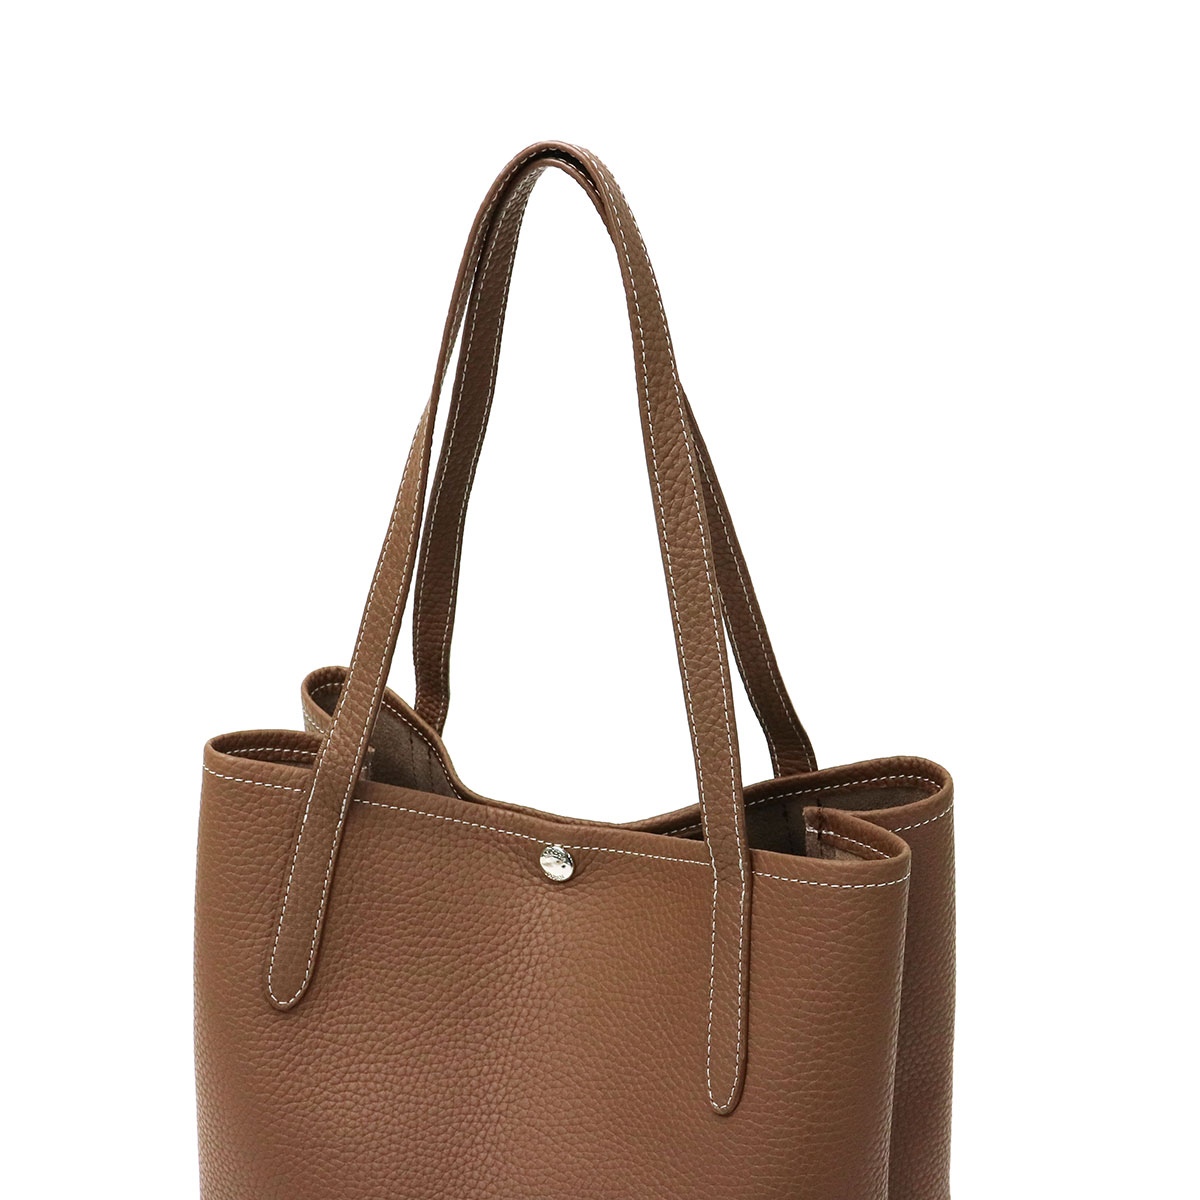 blancle ブランクレ S.LEATHER VERTICAL TOTE L トートバッグ bl-1020